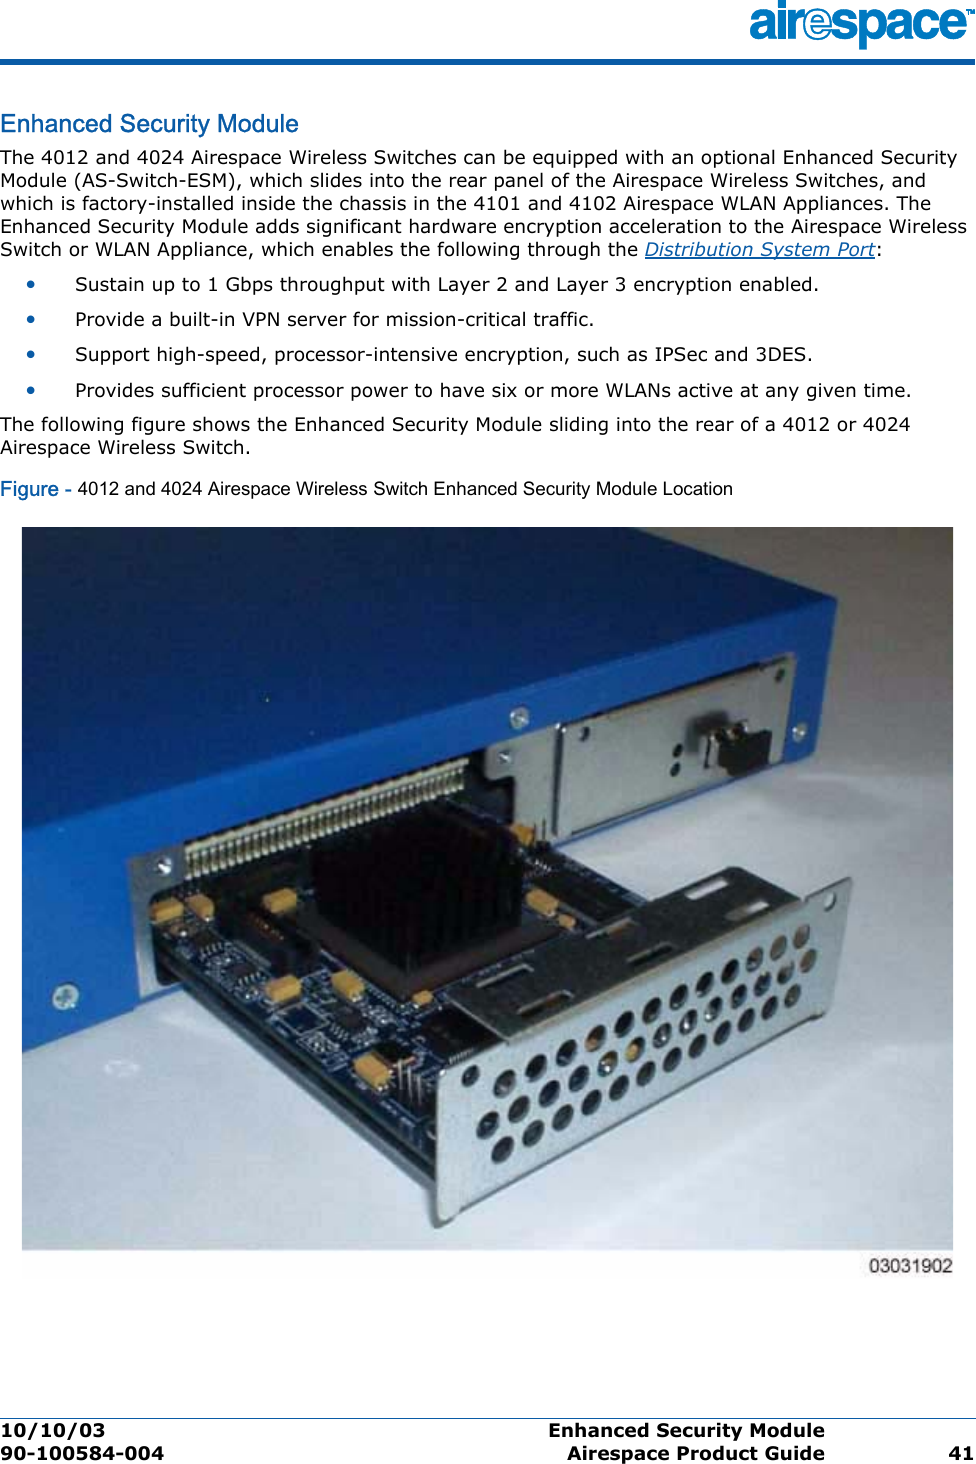 10/10/03 Enhanced Security Module  90-100584-004 Airespace Product Guide 41Enhanced Security ModuleEnhanced Security M oduleThe 4012 and 4024 Airespace Wireless Switches can be equipped with an optional Enhanced Security Module (AS-Switch-ESM), which slides into the rear panel of the Airespace Wireless Switches, and which is factory-installed inside the chassis in the 4101 and 4102 Airespace WLAN Appliances. The Enhanced Security Module adds significant hardware encryption acceleration to the Airespace Wireless Switch or WLAN Appliance, which enables the following through the Distribution System Port:•Sustain up to 1 Gbps throughput with Layer 2 and Layer 3 encryption enabled.•Provide a built-in VPN server for mission-critical traffic.•Support high-speed, processor-intensive encryption, such as IPSec and 3DES.•Provides sufficient processor power to have six or more WLANs active at any given time.The following figure shows the Enhanced Security Module sliding into the rear of a 4012 or 4024 Airespace Wireless Switch.Figure - 4012 and 4024 Airespace Wireless Switch Enhanced Security Module Location